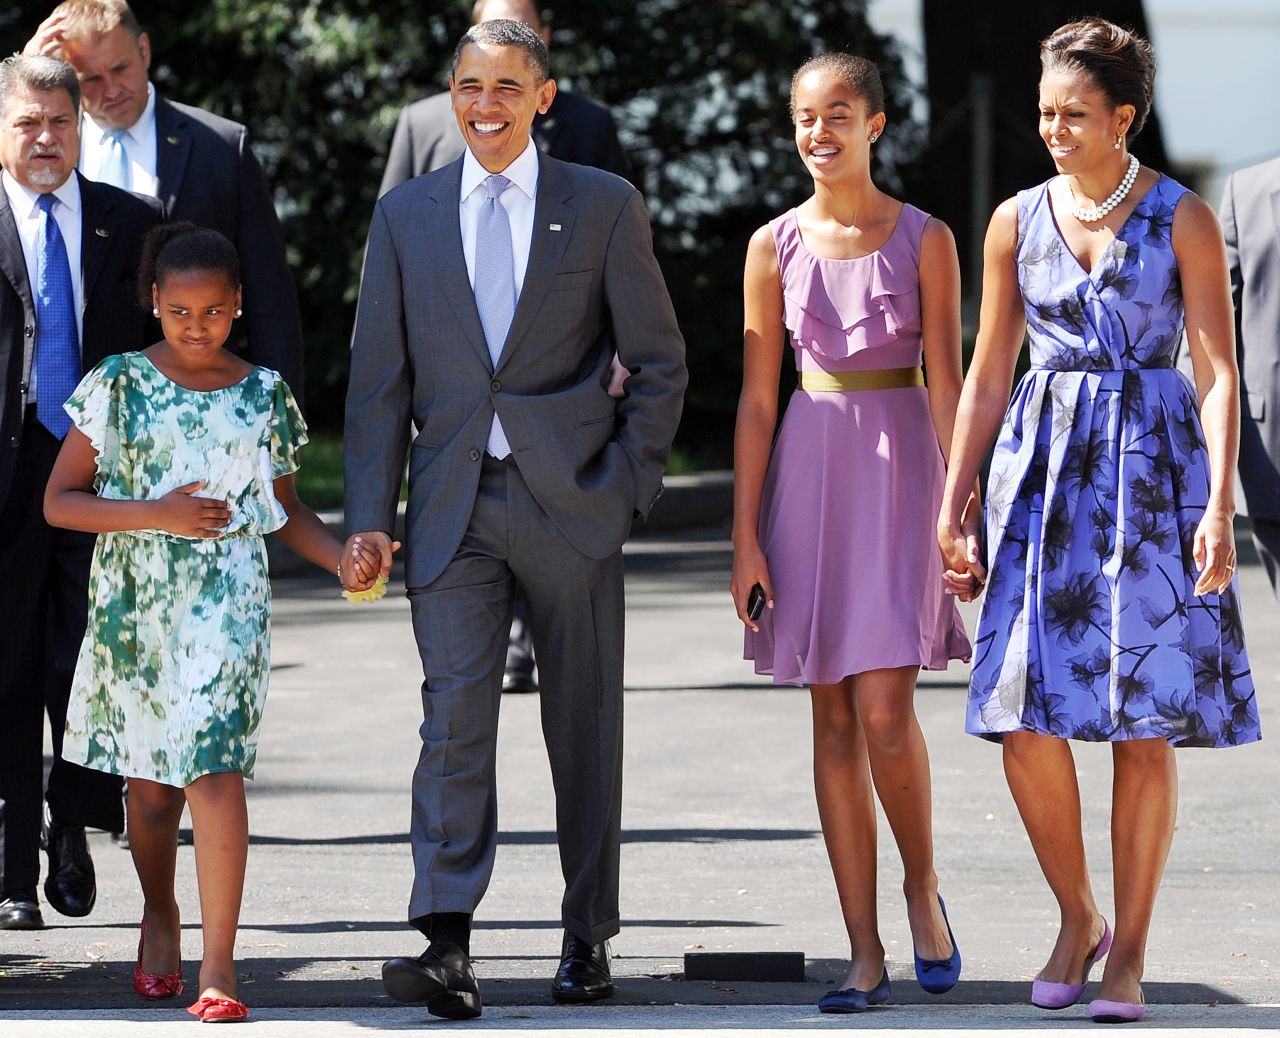 U.S. President Barack Obama walks to church with his wife, first lady Michelle Obama, and their daughters Sasha, left, and Malia, right in 2011.